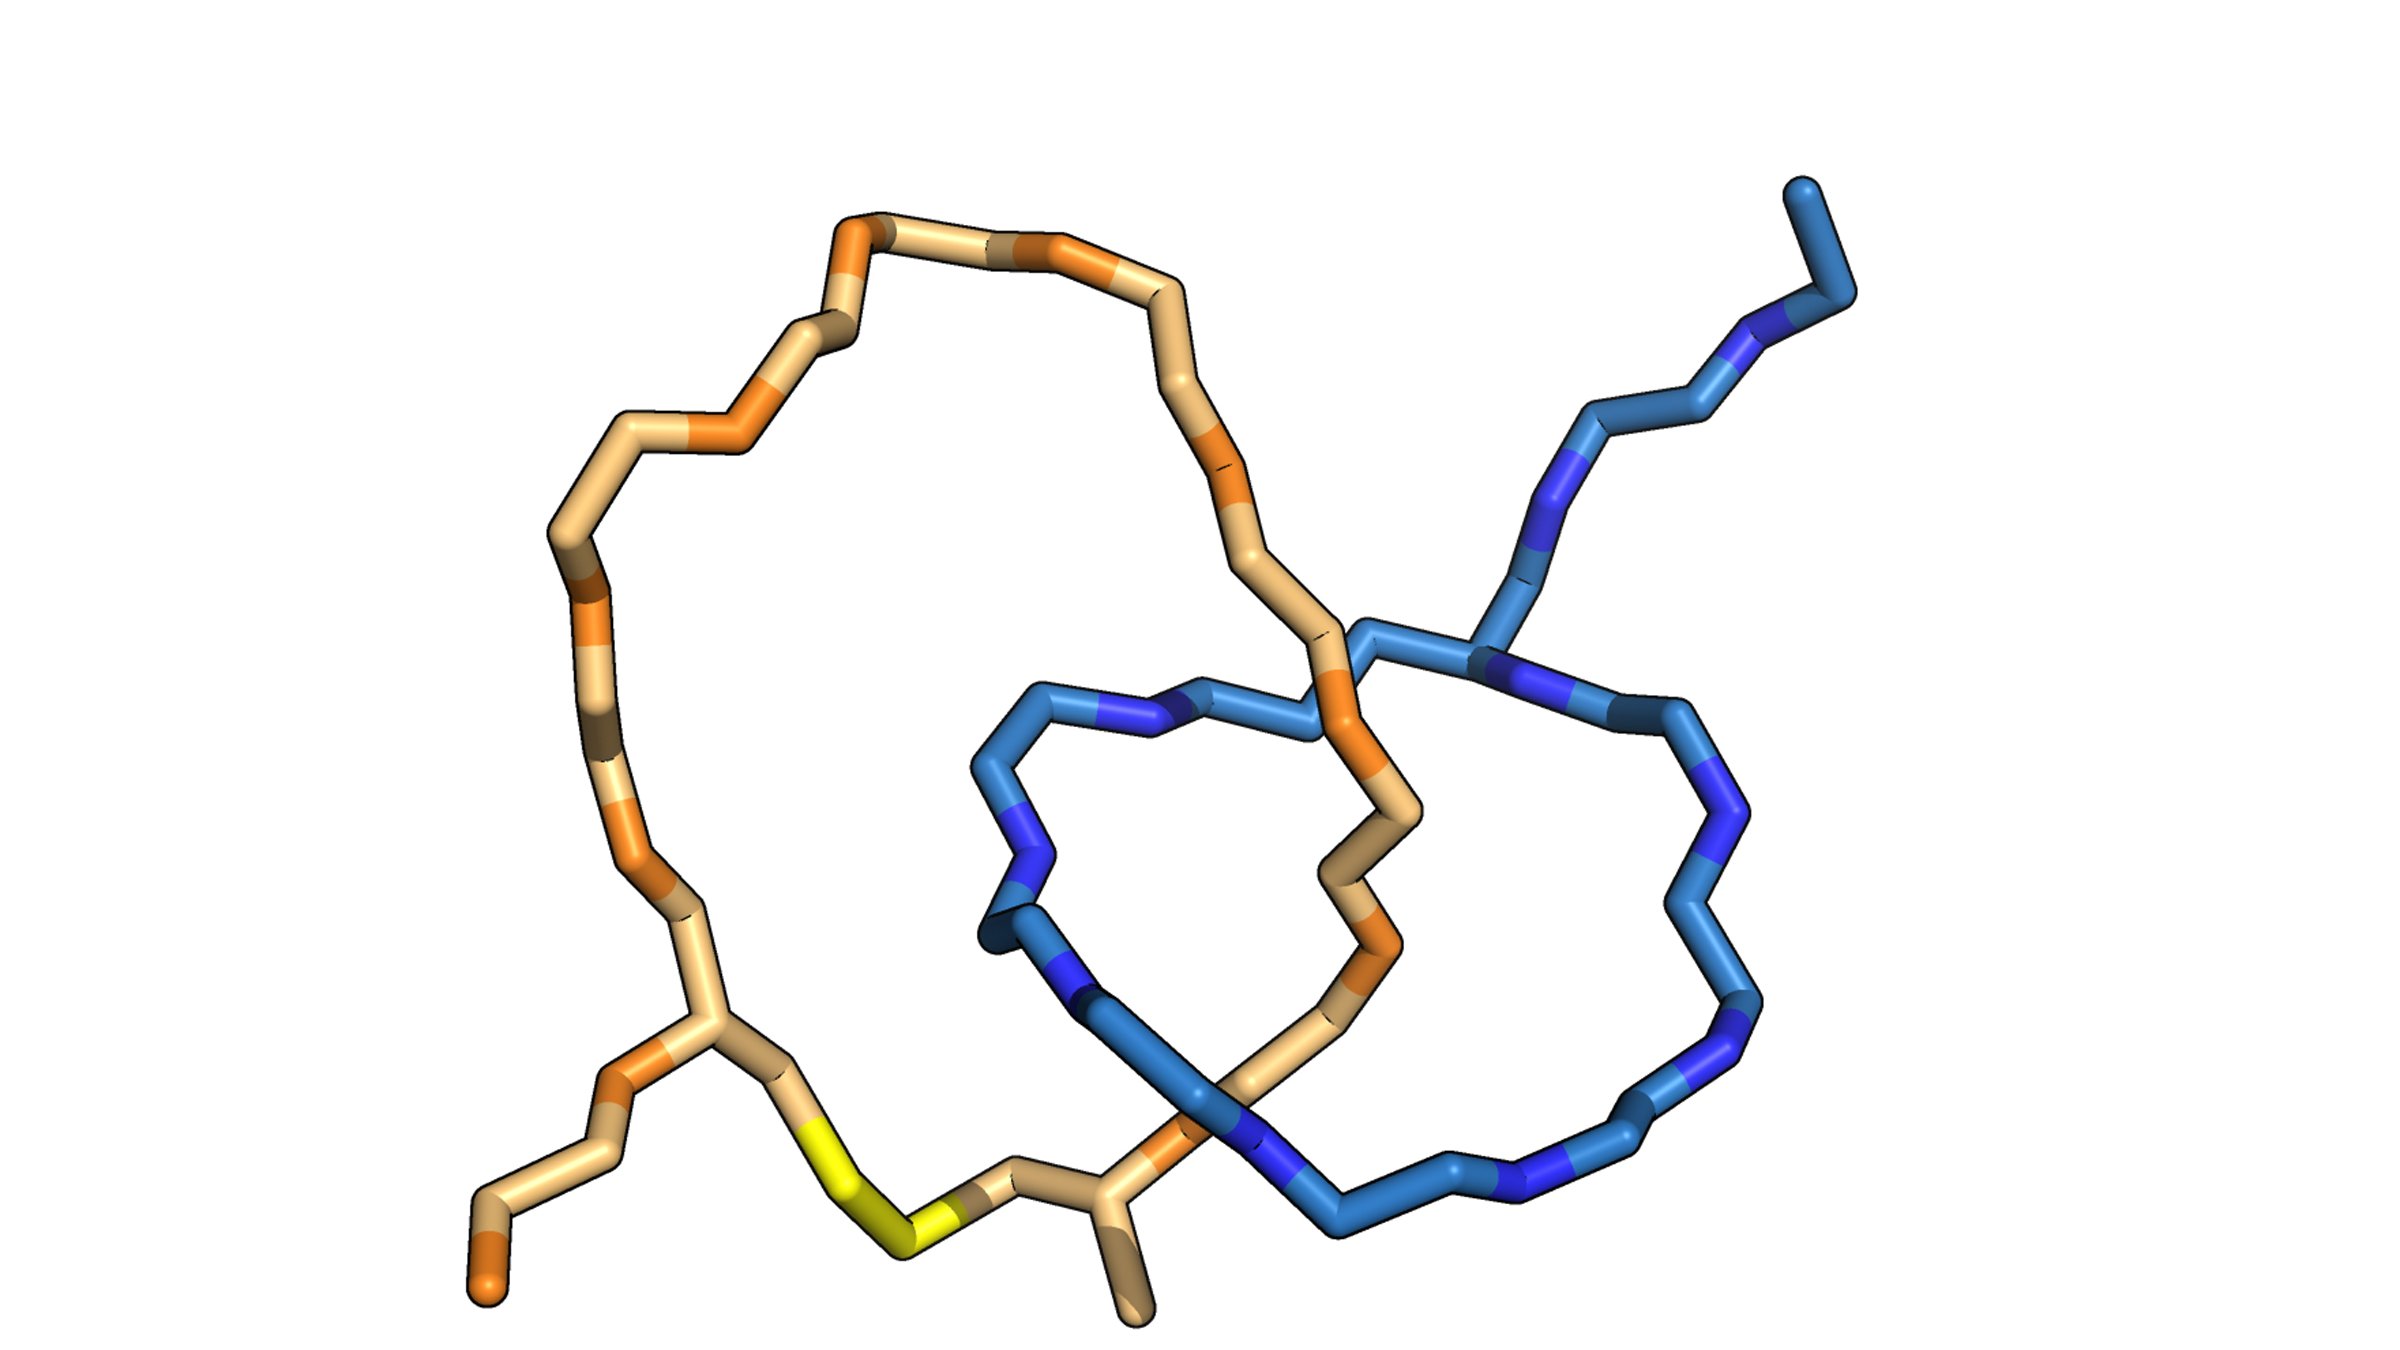 The naturally occurring peptides normally form a single lasso shape